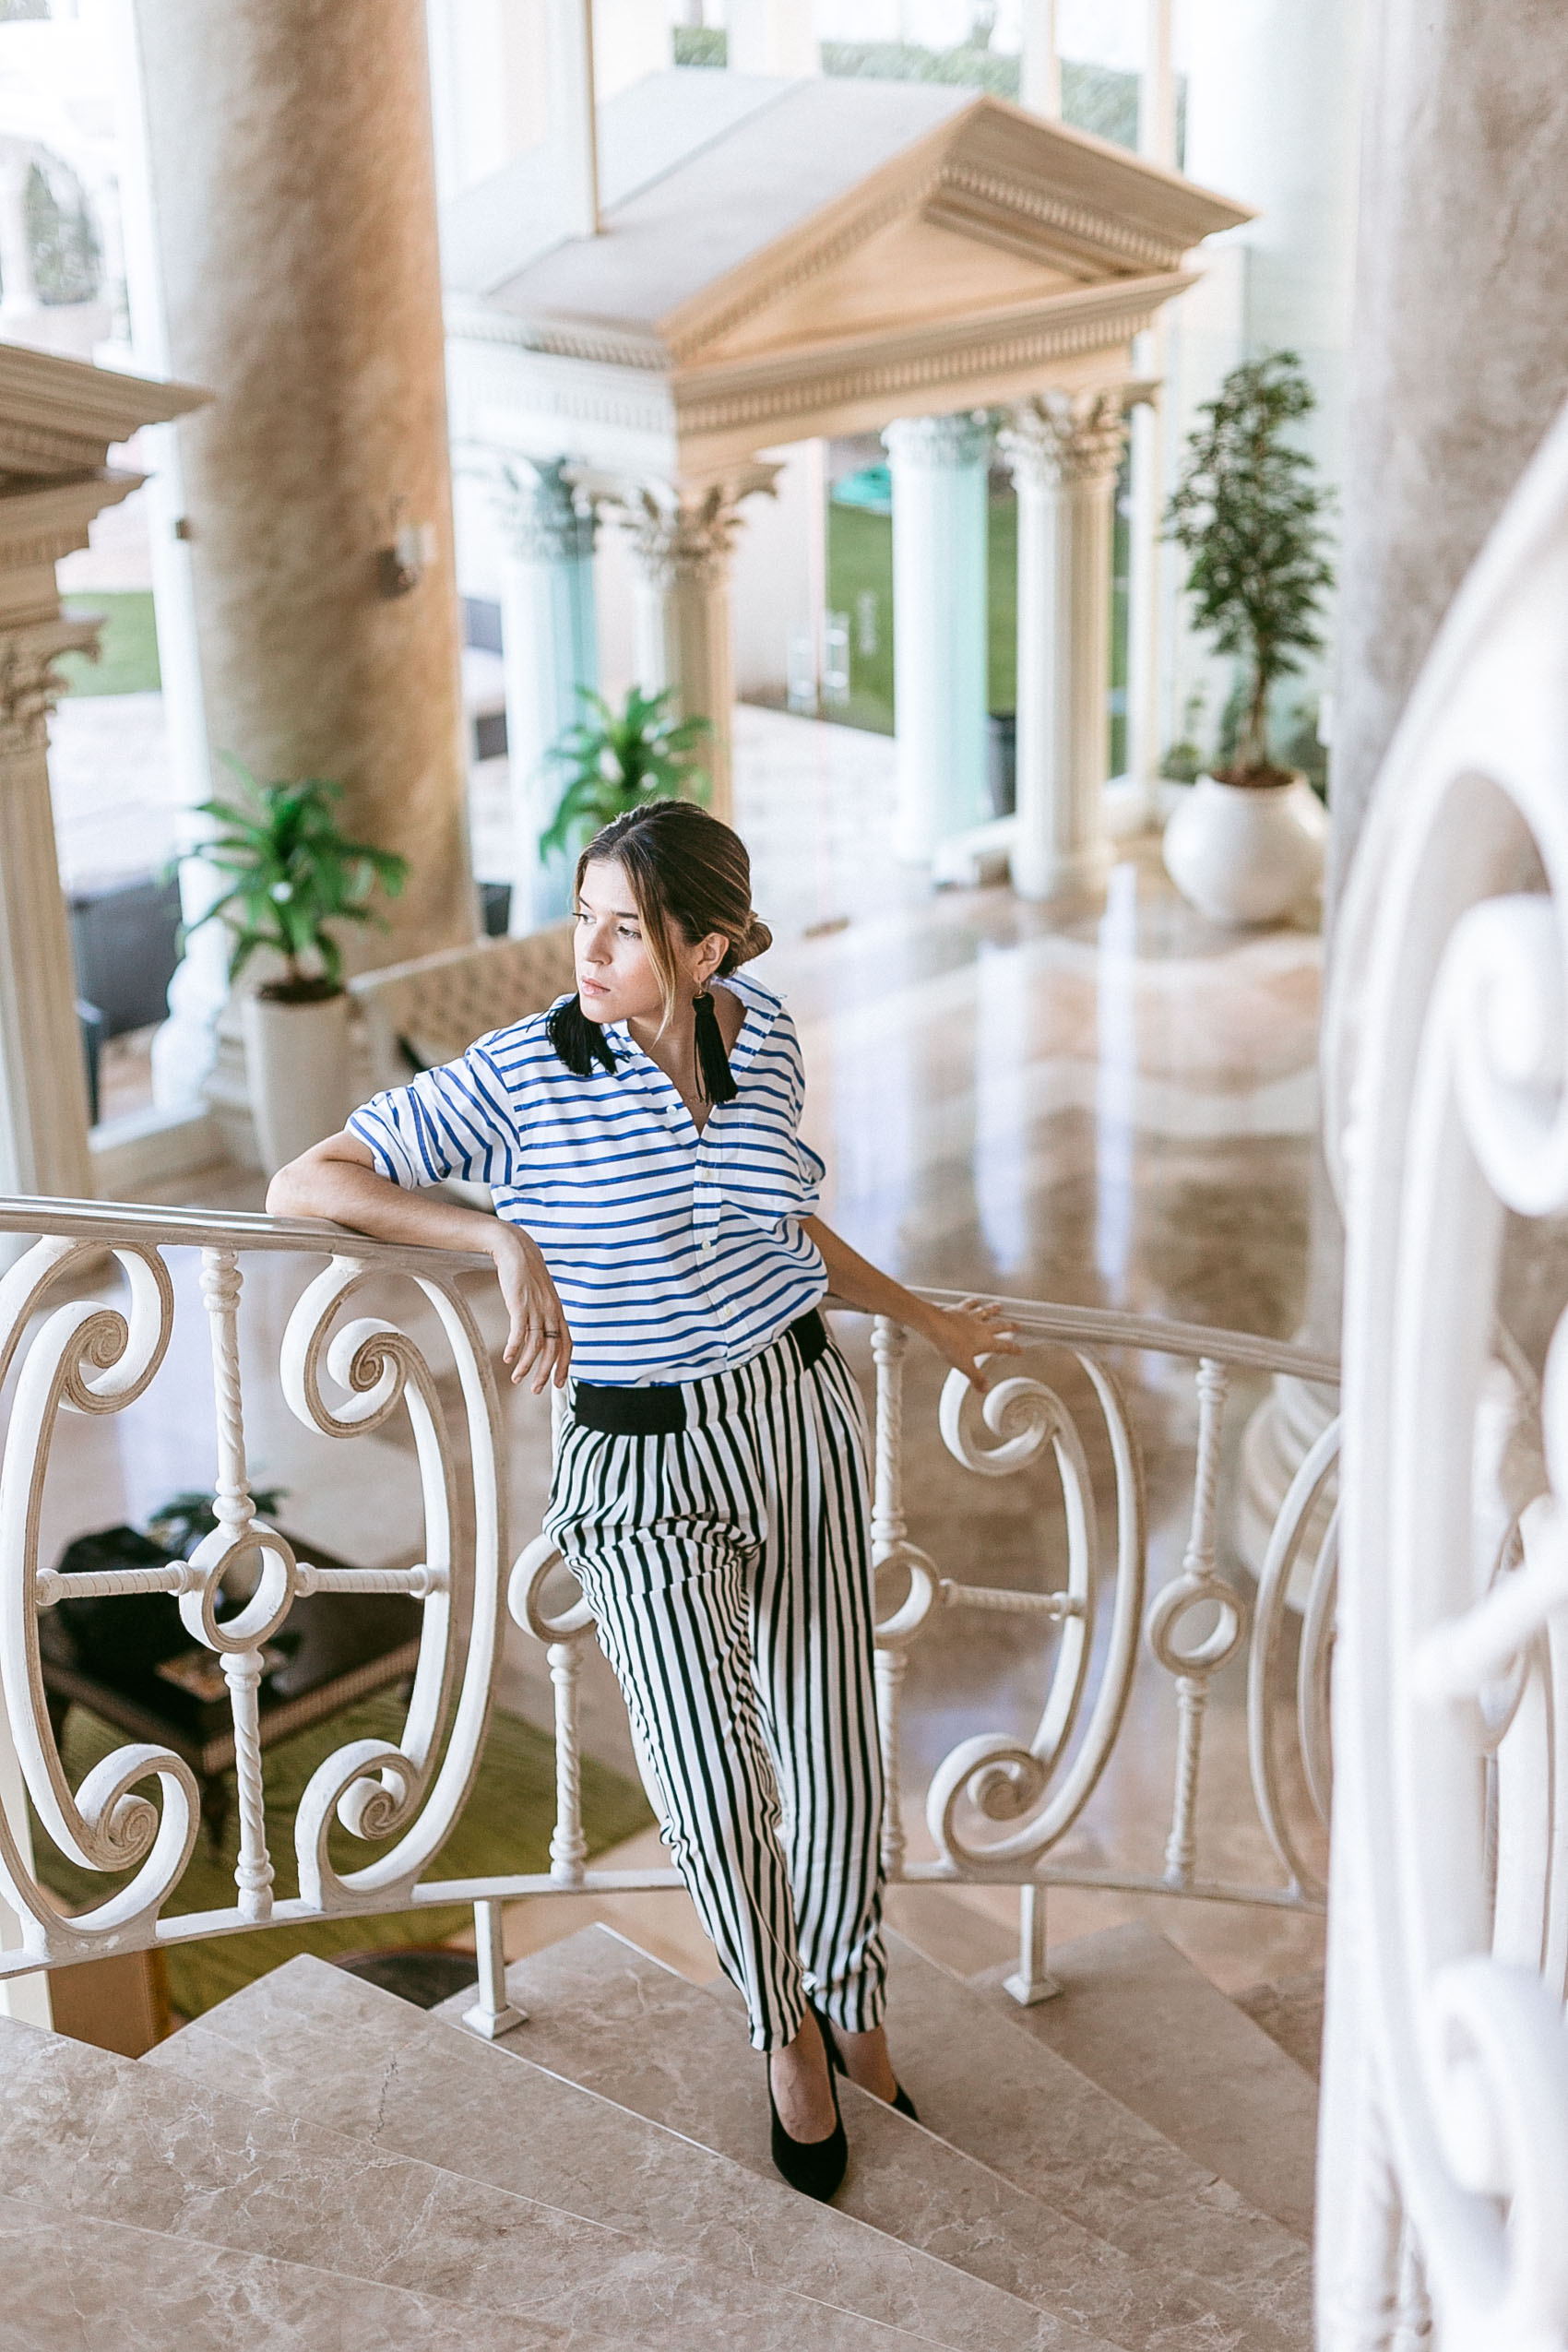 Maristella mixing different color and direction stripes with a Polo Ralph Lauren striped button blouse, Zara stripe trousers, black pumps and statement earrings